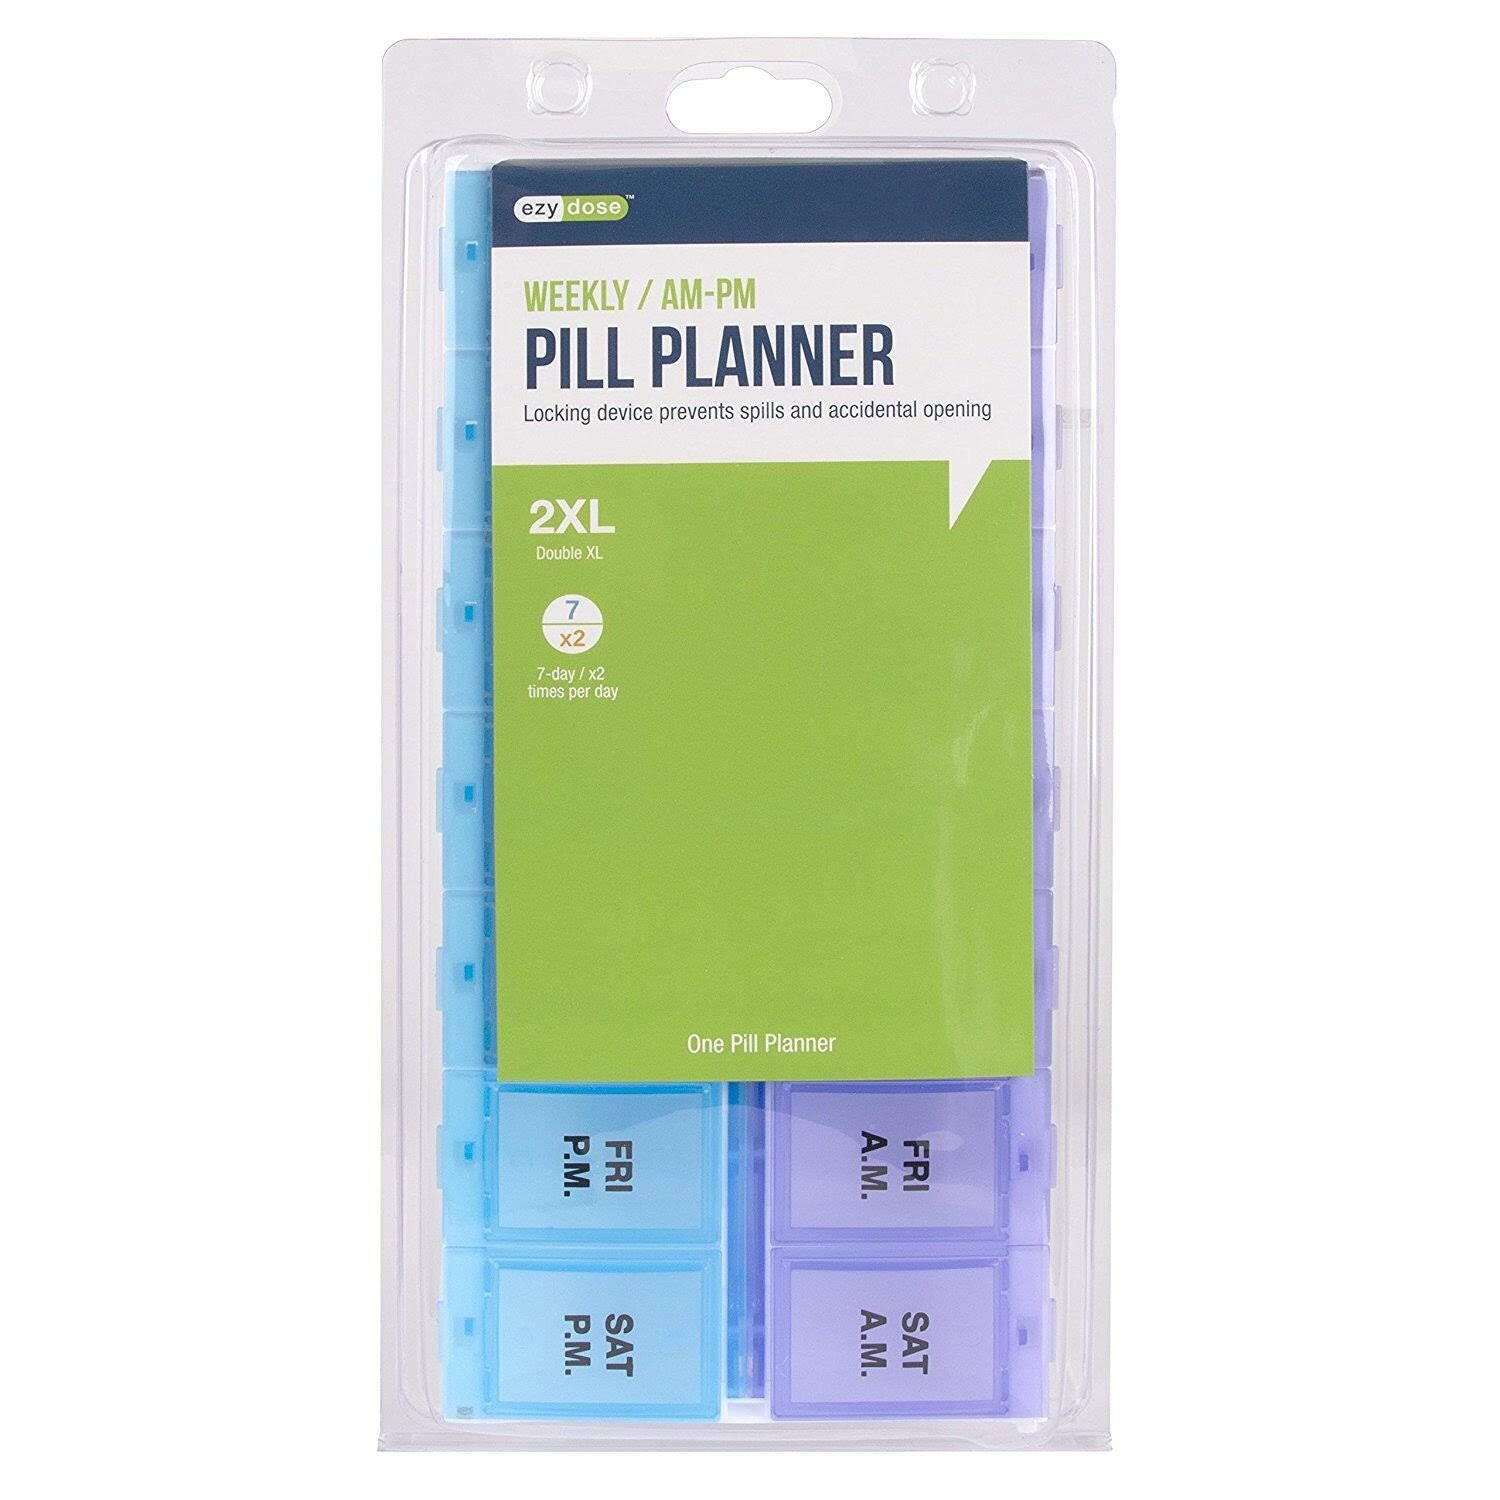 Ezy Dose Weekly Locking AM/PM Pill Planner 2XL #67828